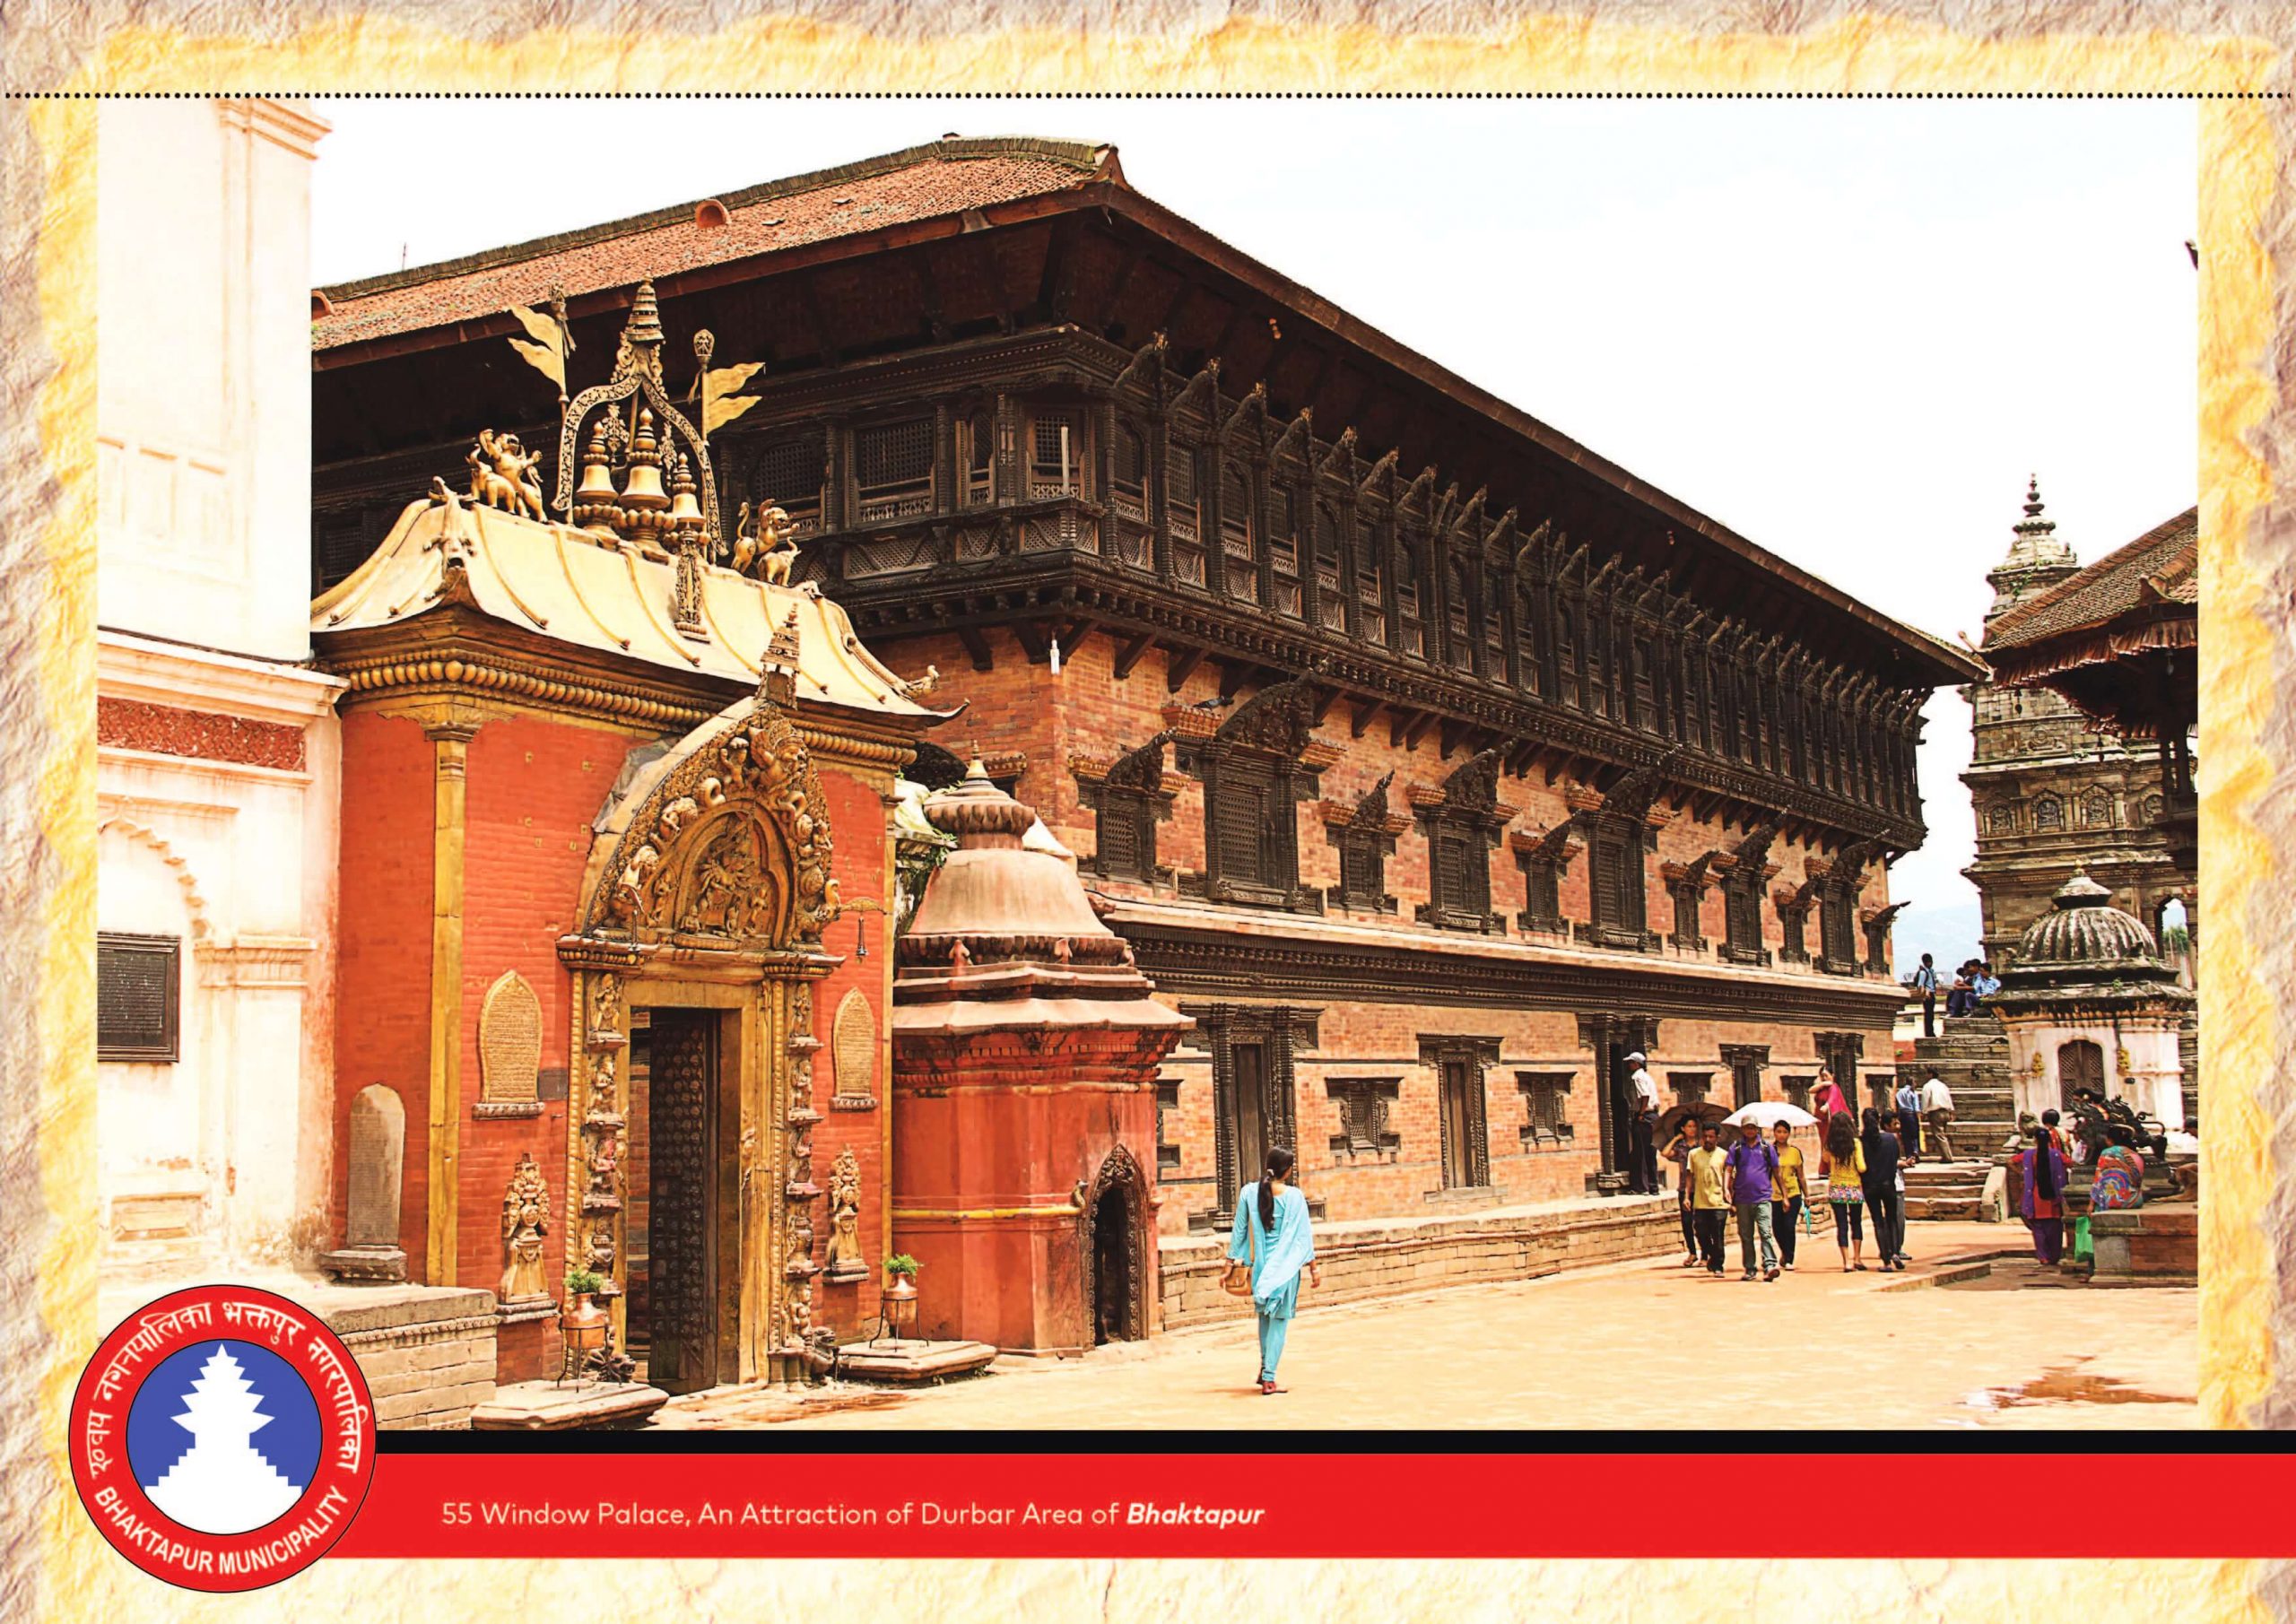 55 window palace; an attraction of Durbar area of Bhaktapur image